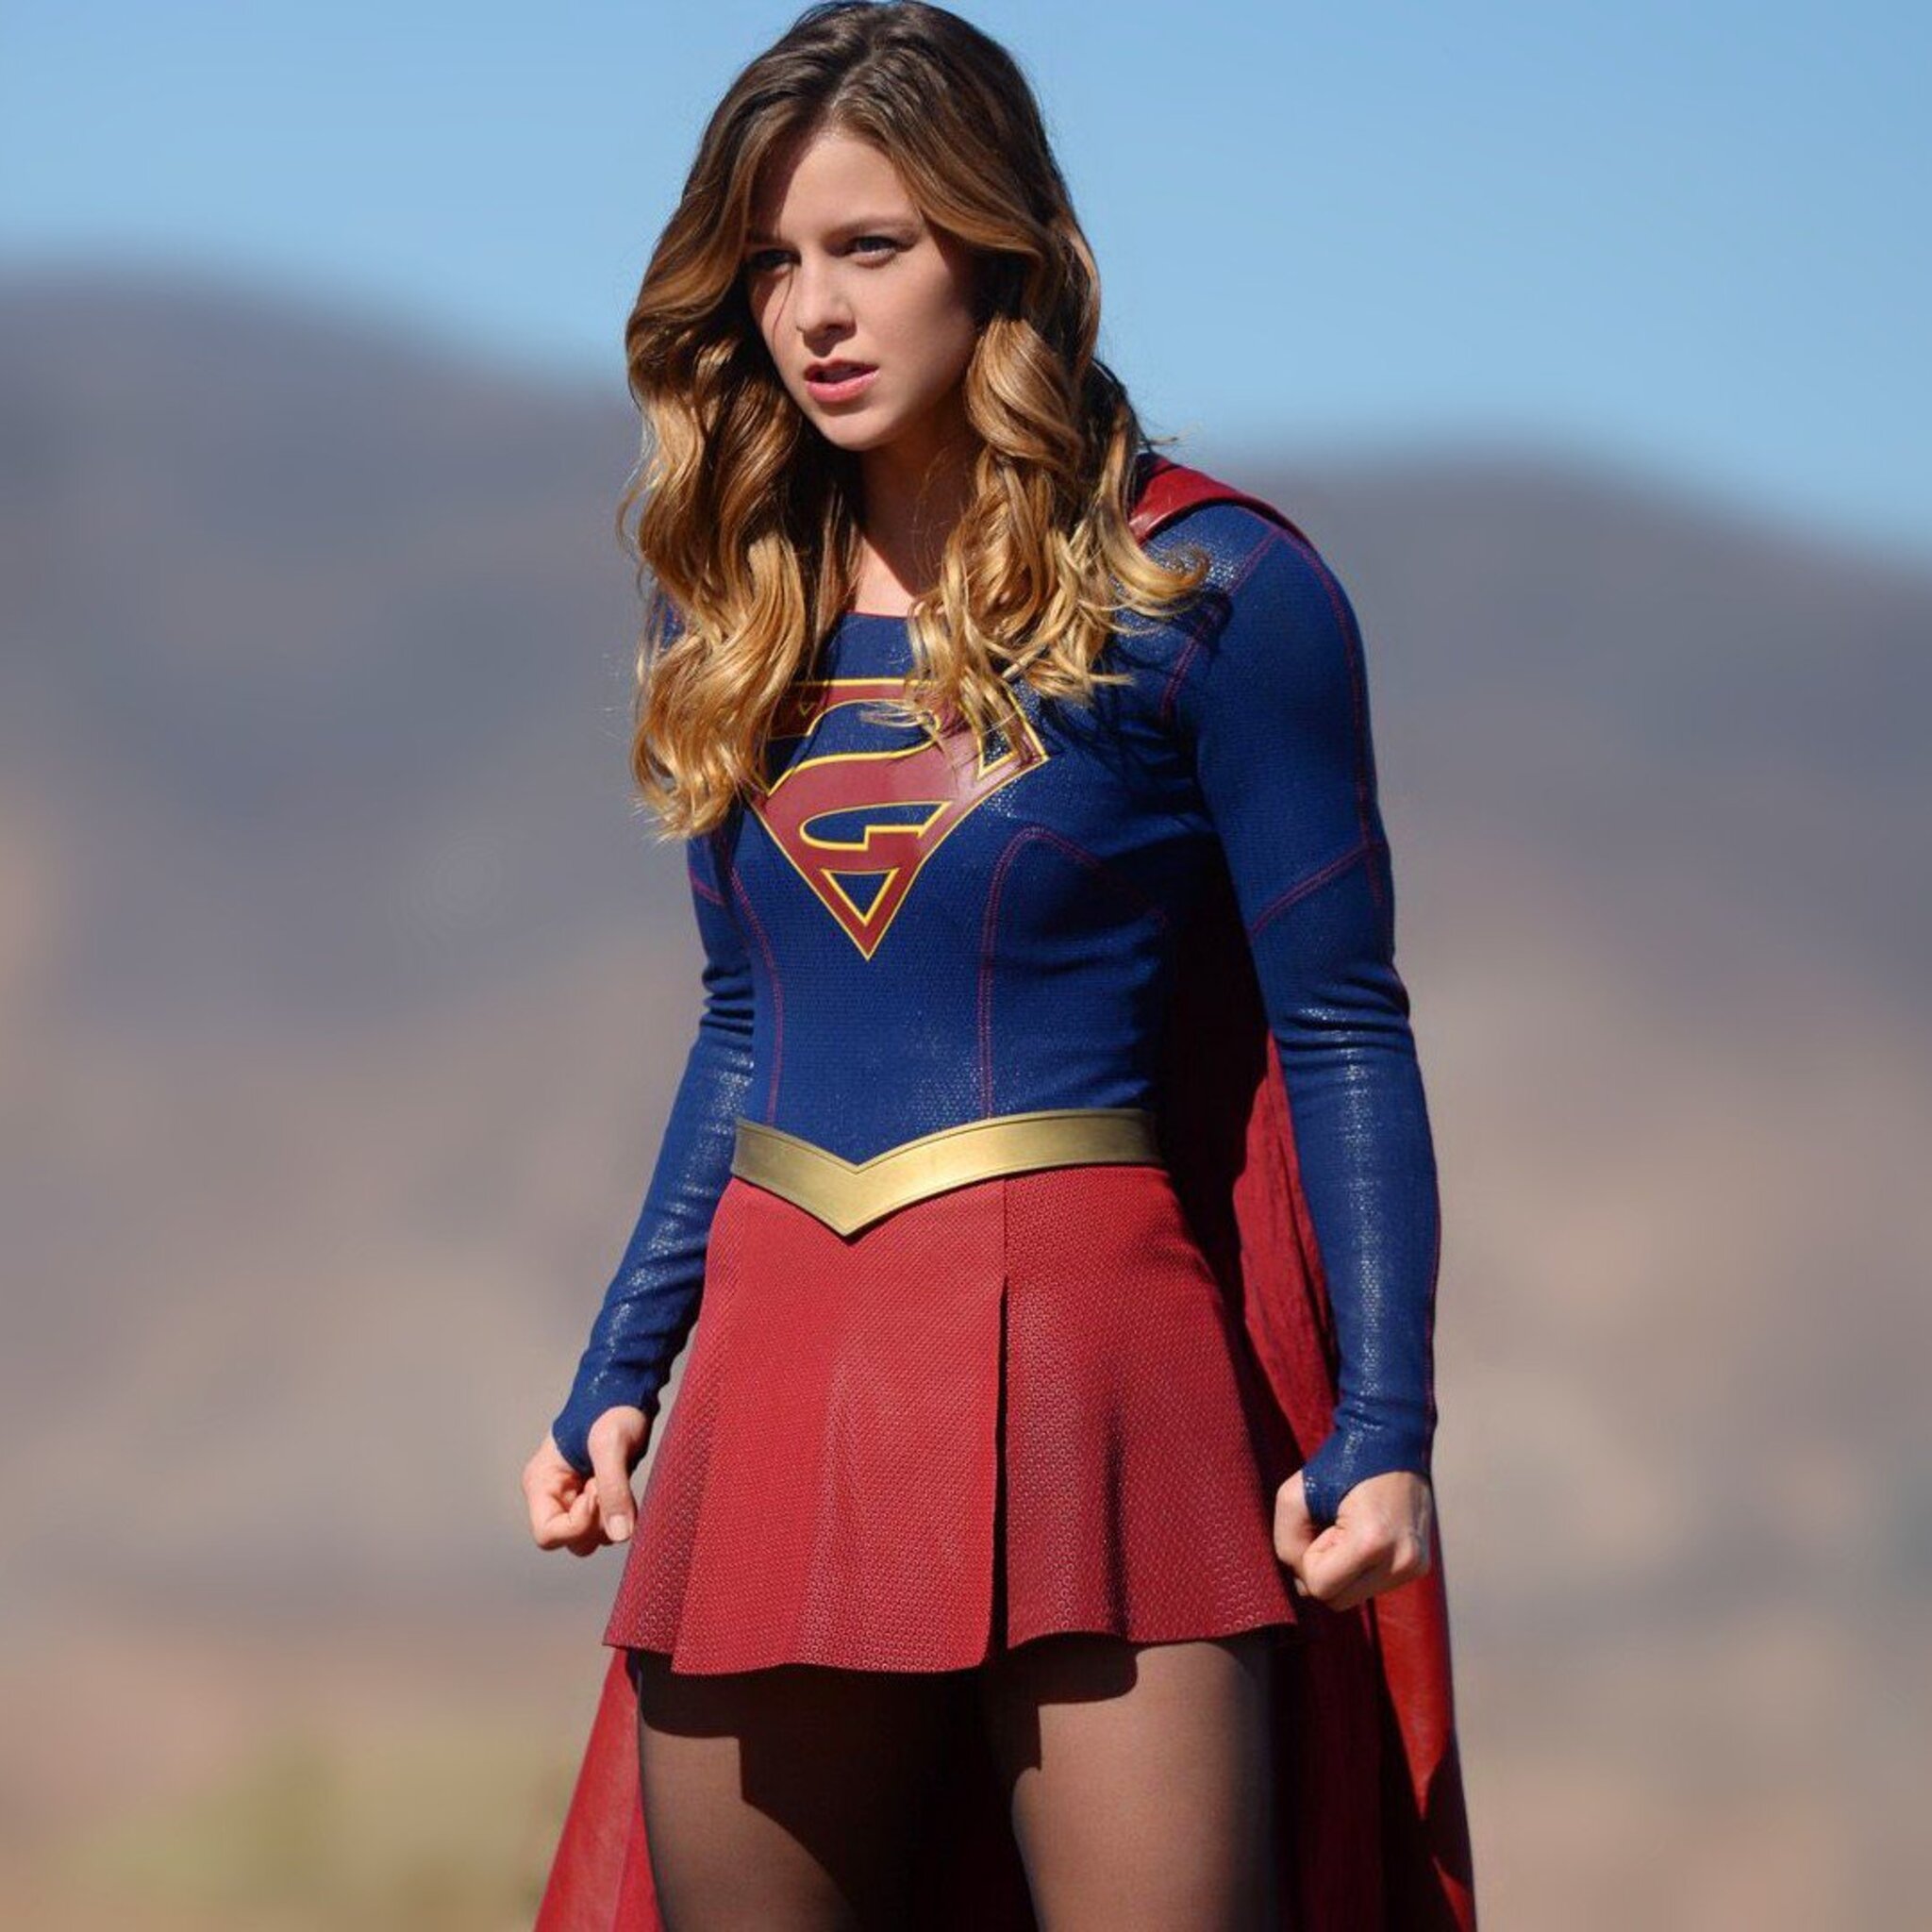 supergirl-wallpapers. tv-shows-wallpapers. girls-wallpapers. 